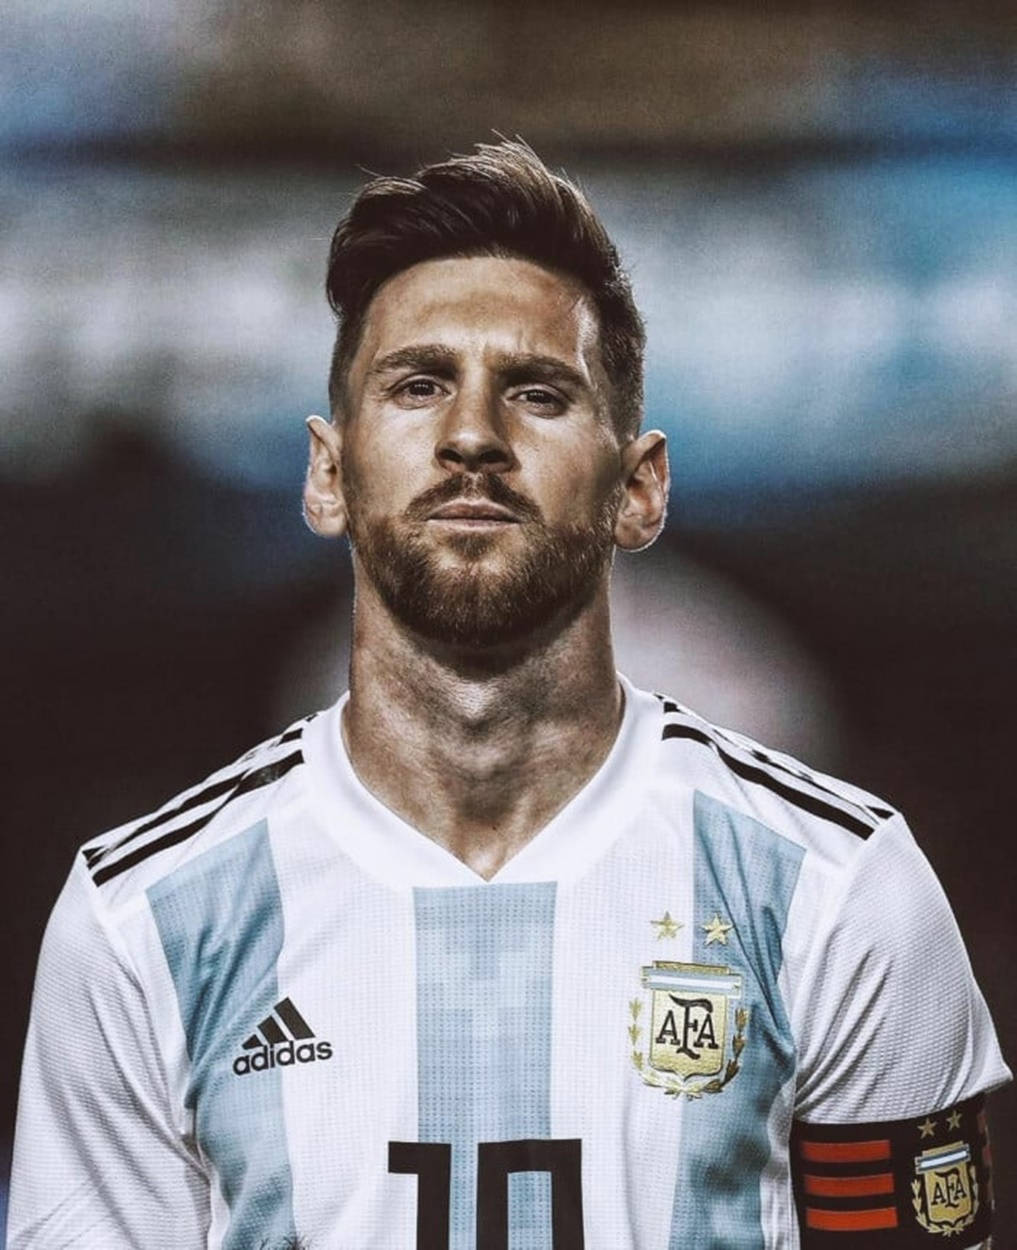 4K MESSI WALLPAPERS | ⚠️TURN ON CLEAR MODE SO YOU CAN GET A GOOD CROP⚠... | messi  wallpaper 4k | TikTok